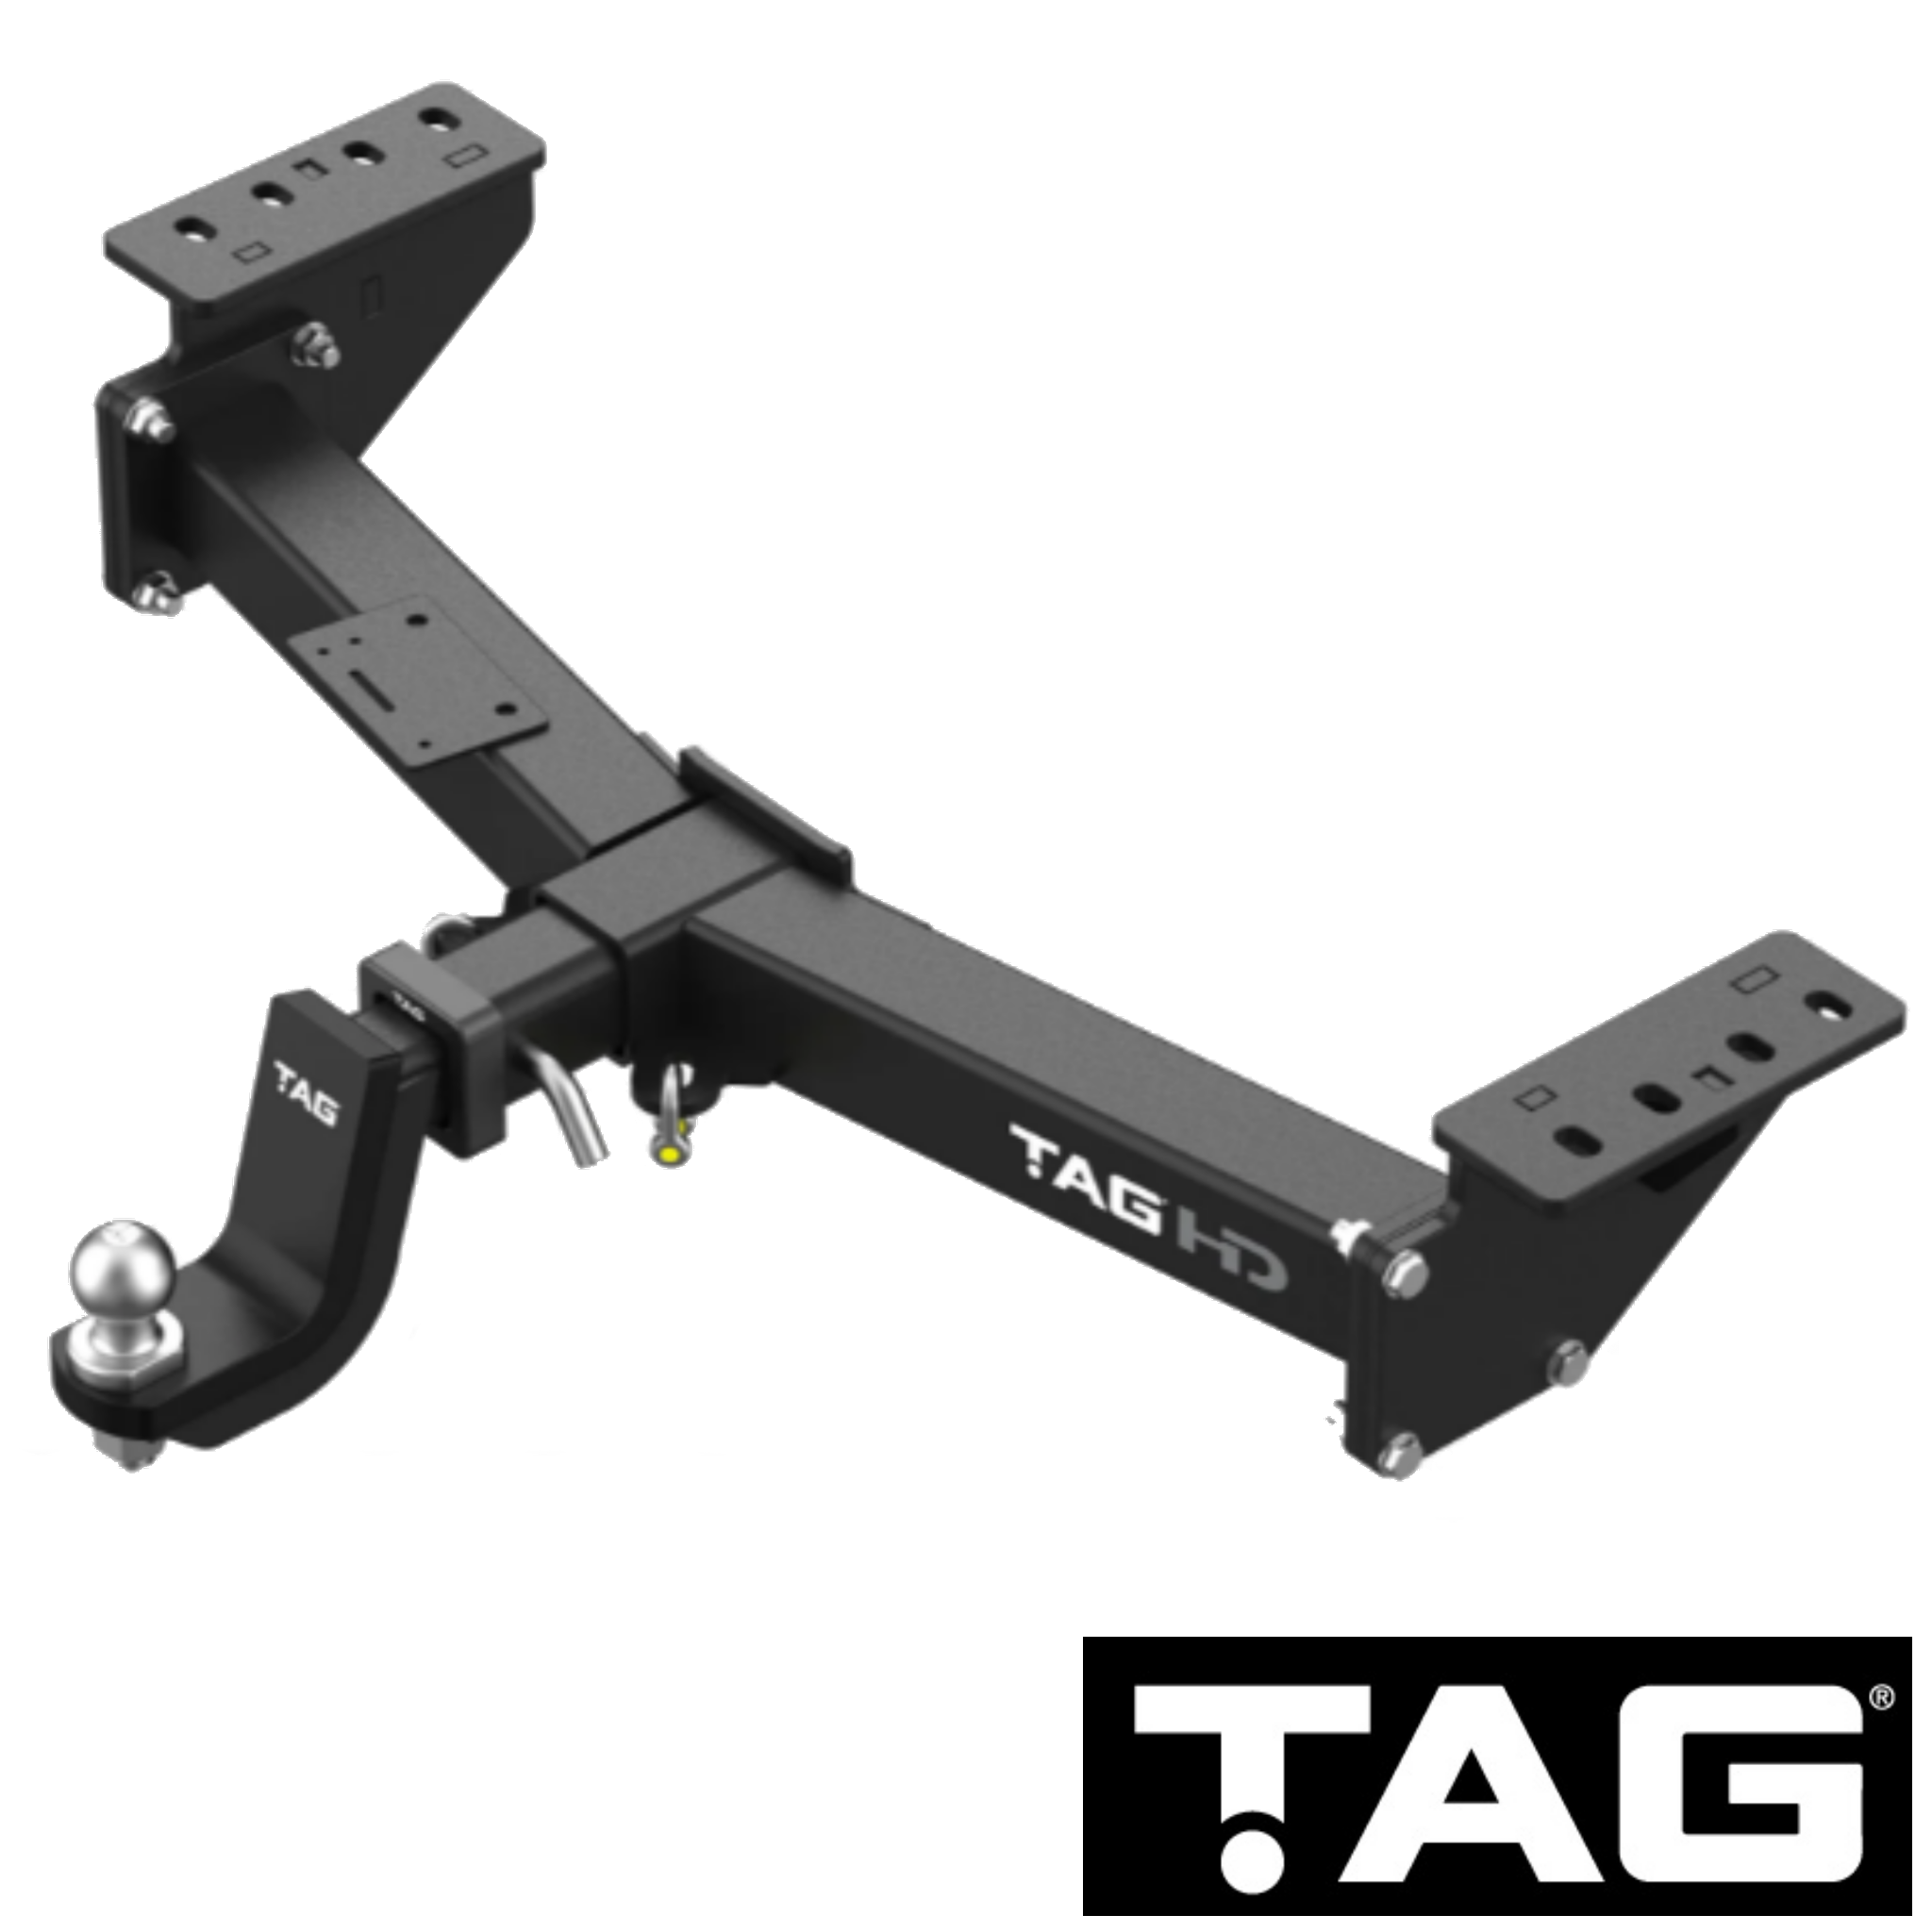 Ford Ranger Next Gen T6.2 Cab Chassis 05/2022 - On - Towbar Kit - HEAVY DUTY ECONOMY